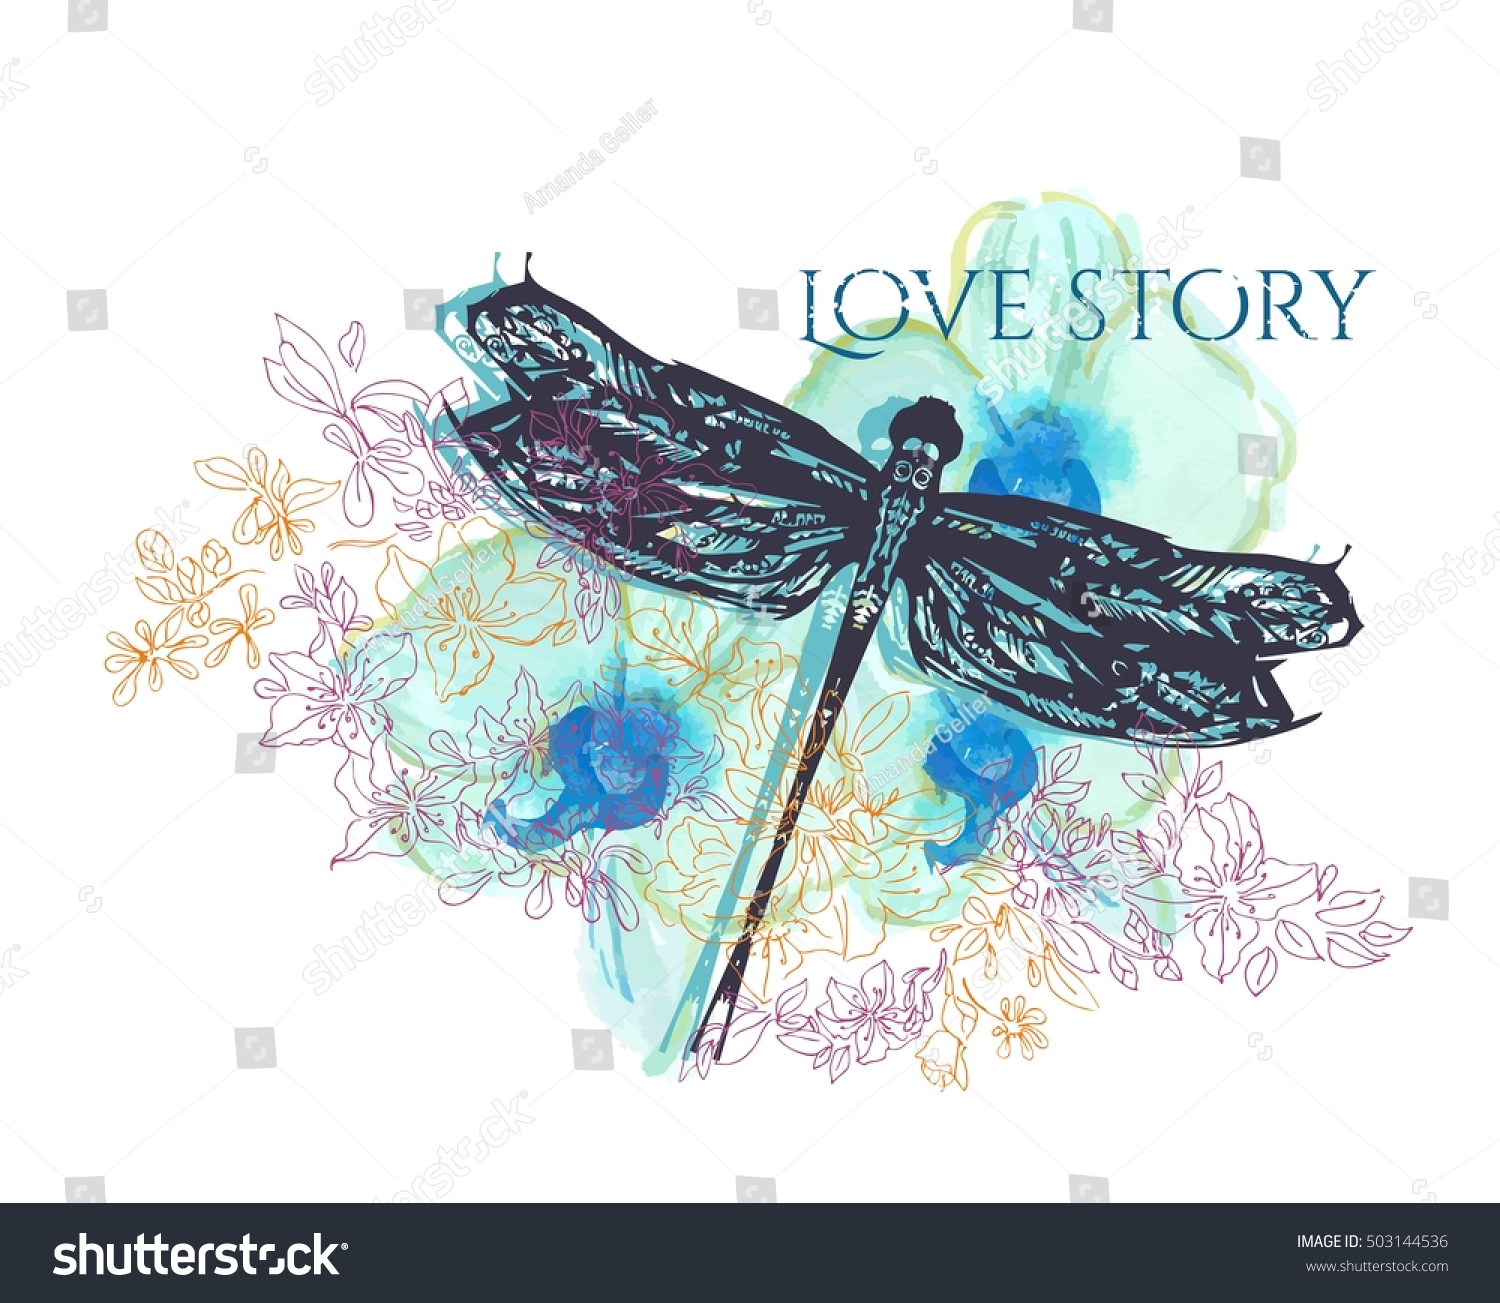 Sketch Dragonfly Flowers On Abstract Background Stock Vector (2018 ...